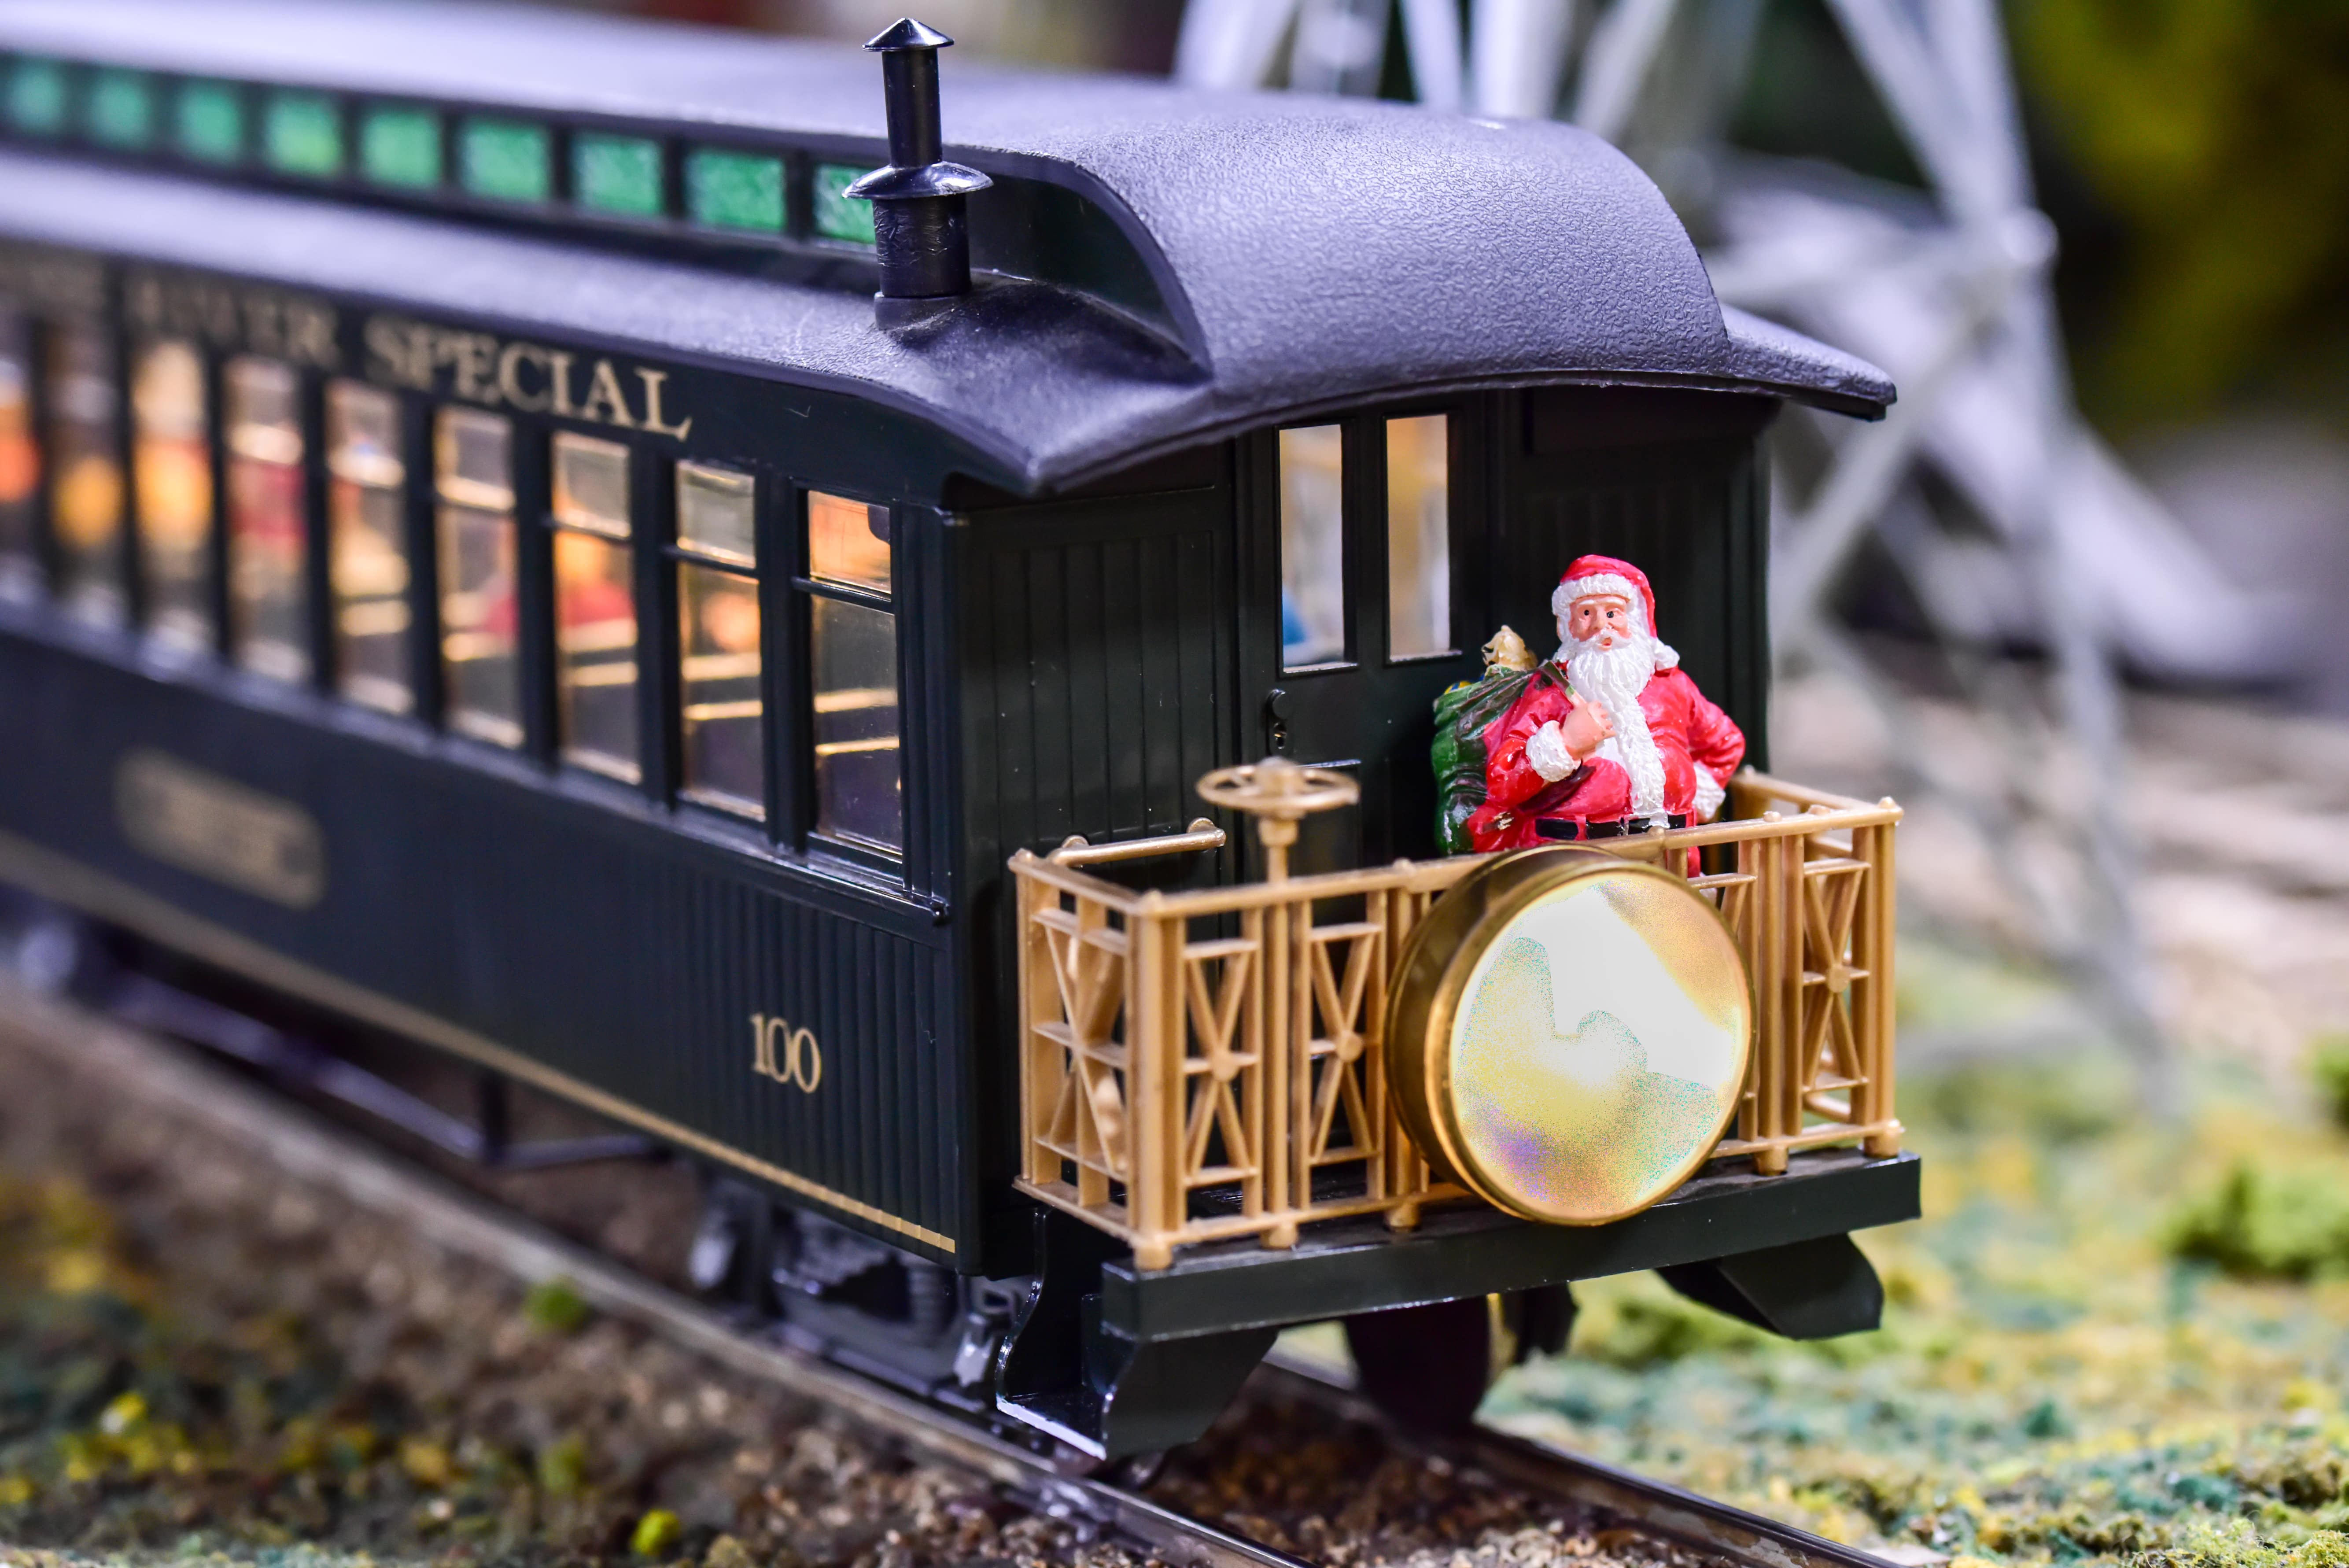 A tiny figurine of Santa holding a sack stands on at the front of a toy train on a track.